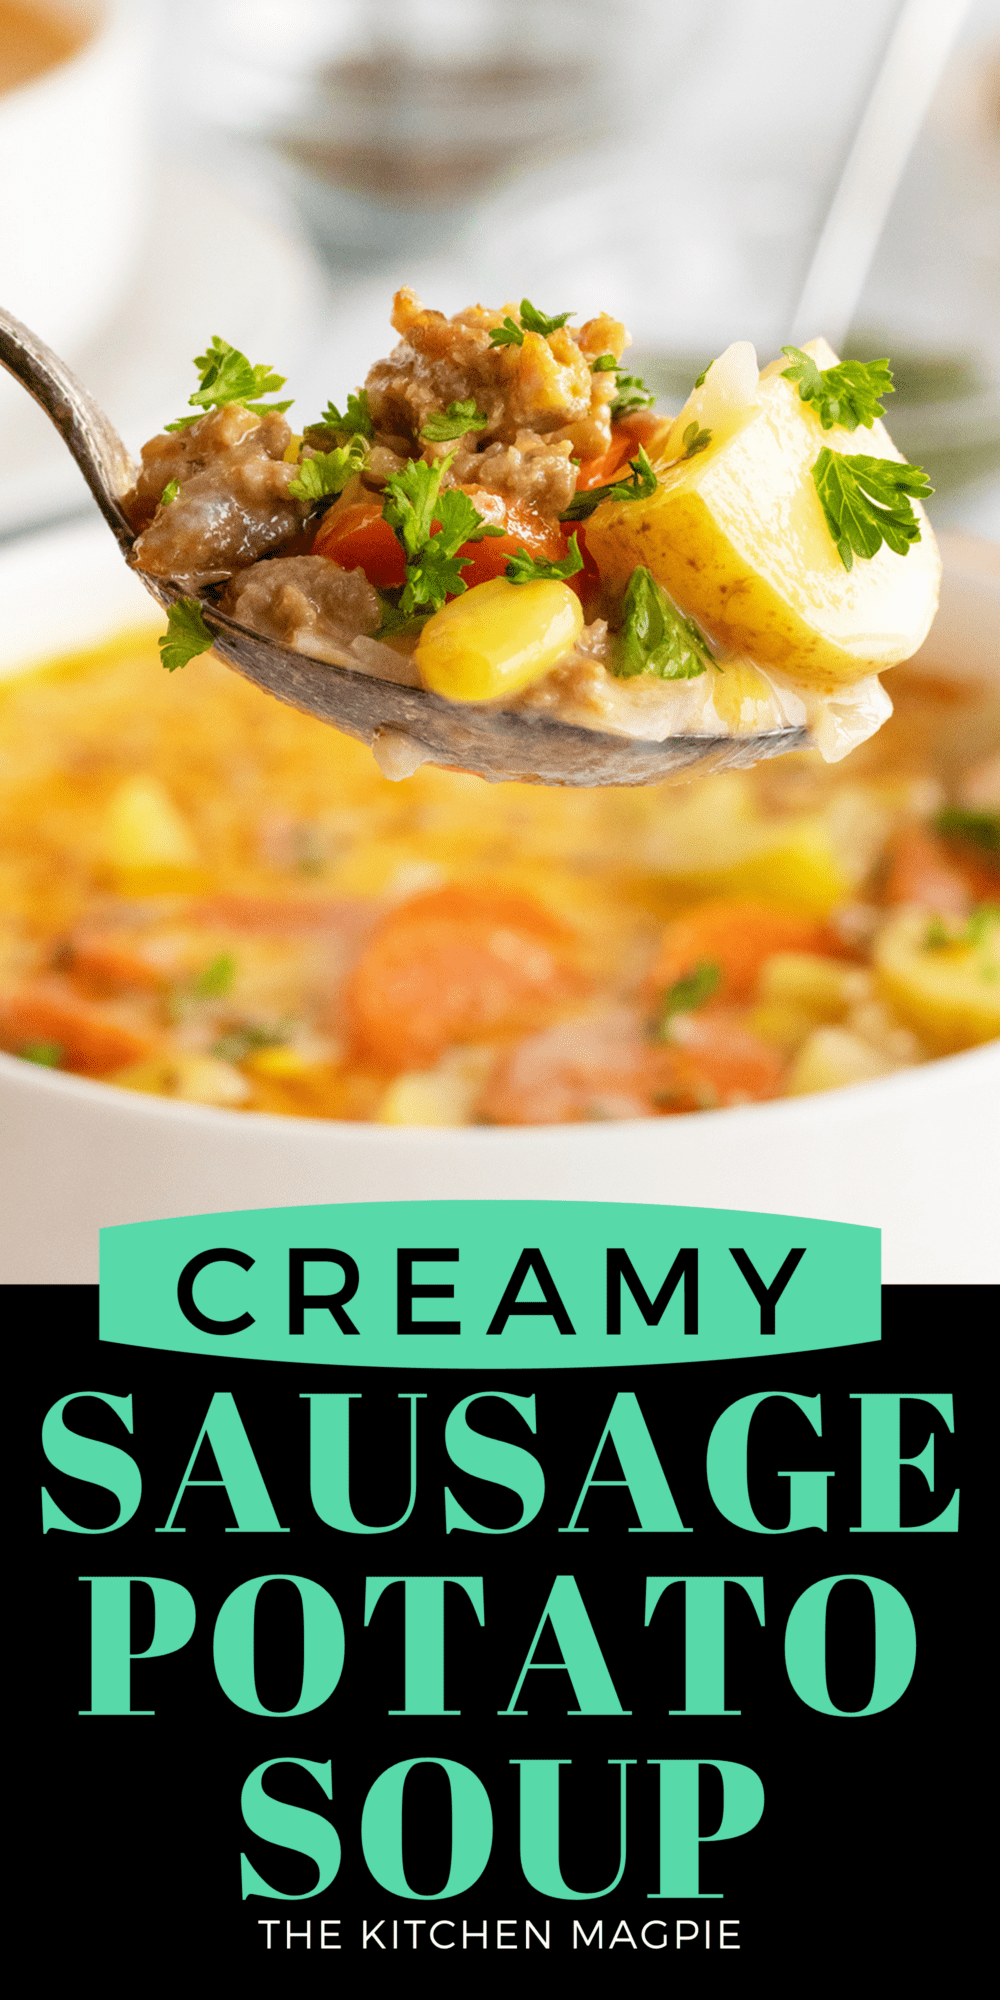 This decadent but easy to make Creamy Sausage Potato Soup is made with ground Italian sausage and loaded up with potatoes and vegetables.